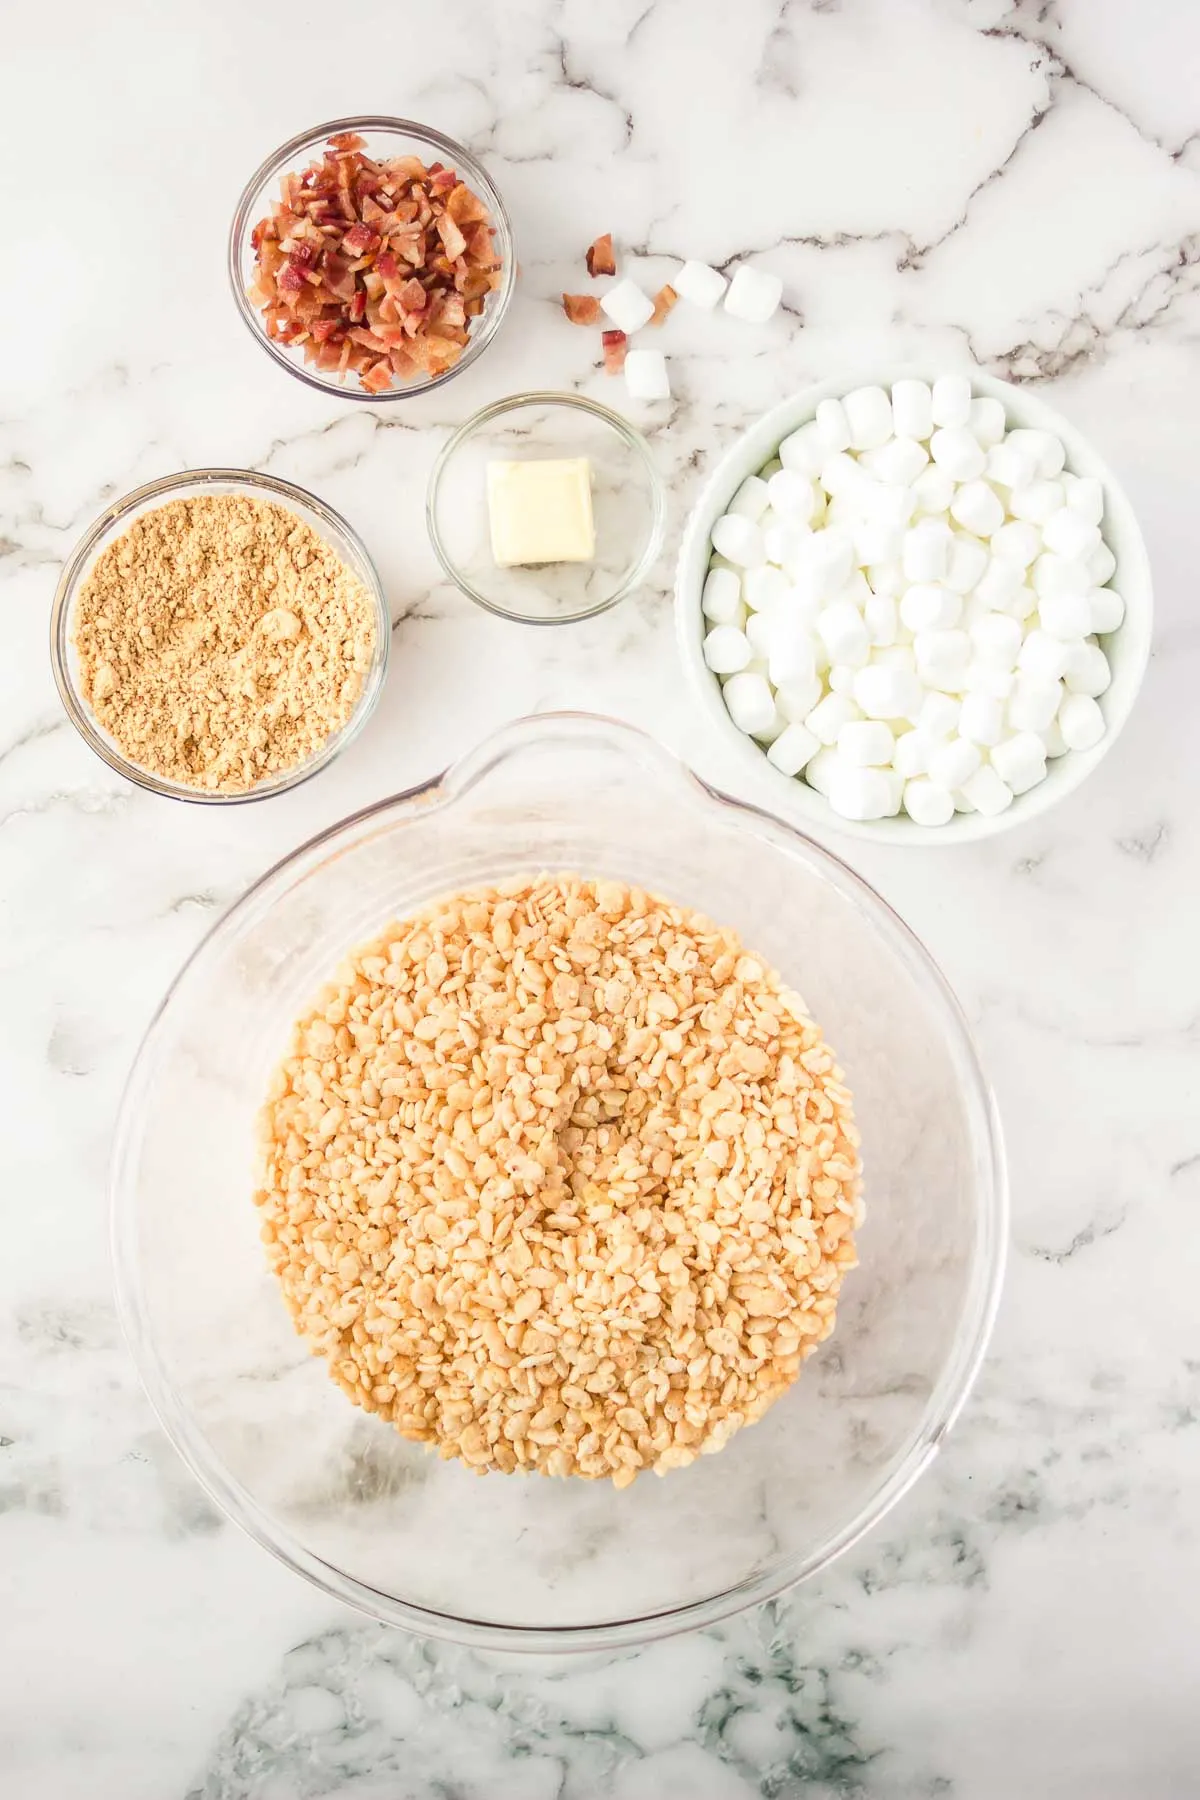 Ingredients to make Peanut Butter Rice Krispies Treats with bacon.